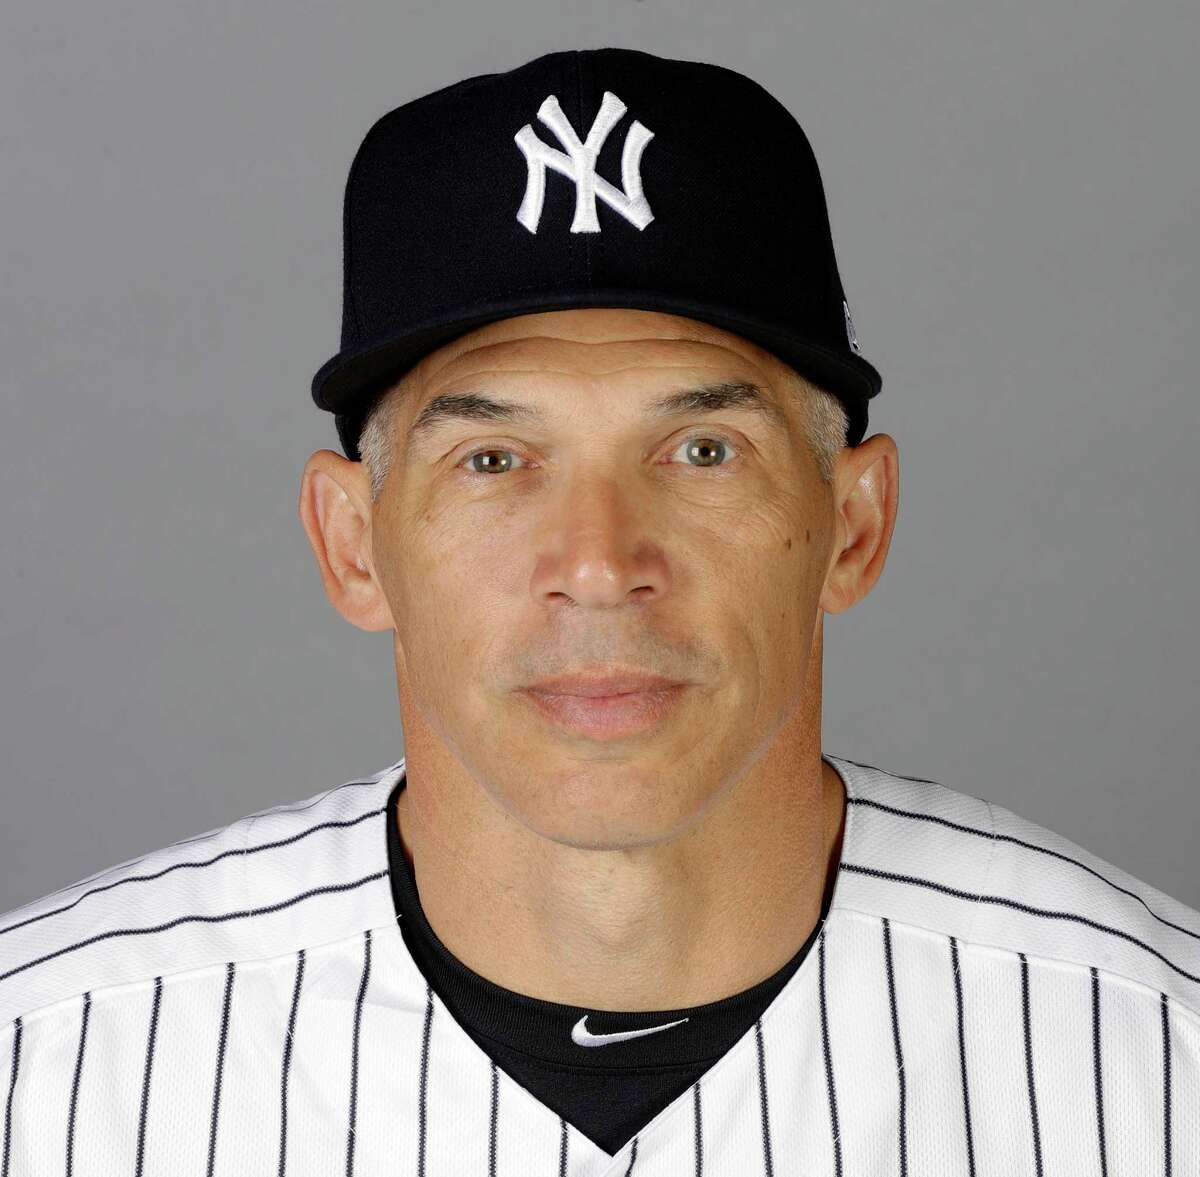 Joe Girardi out after 10 years as Yankees manager